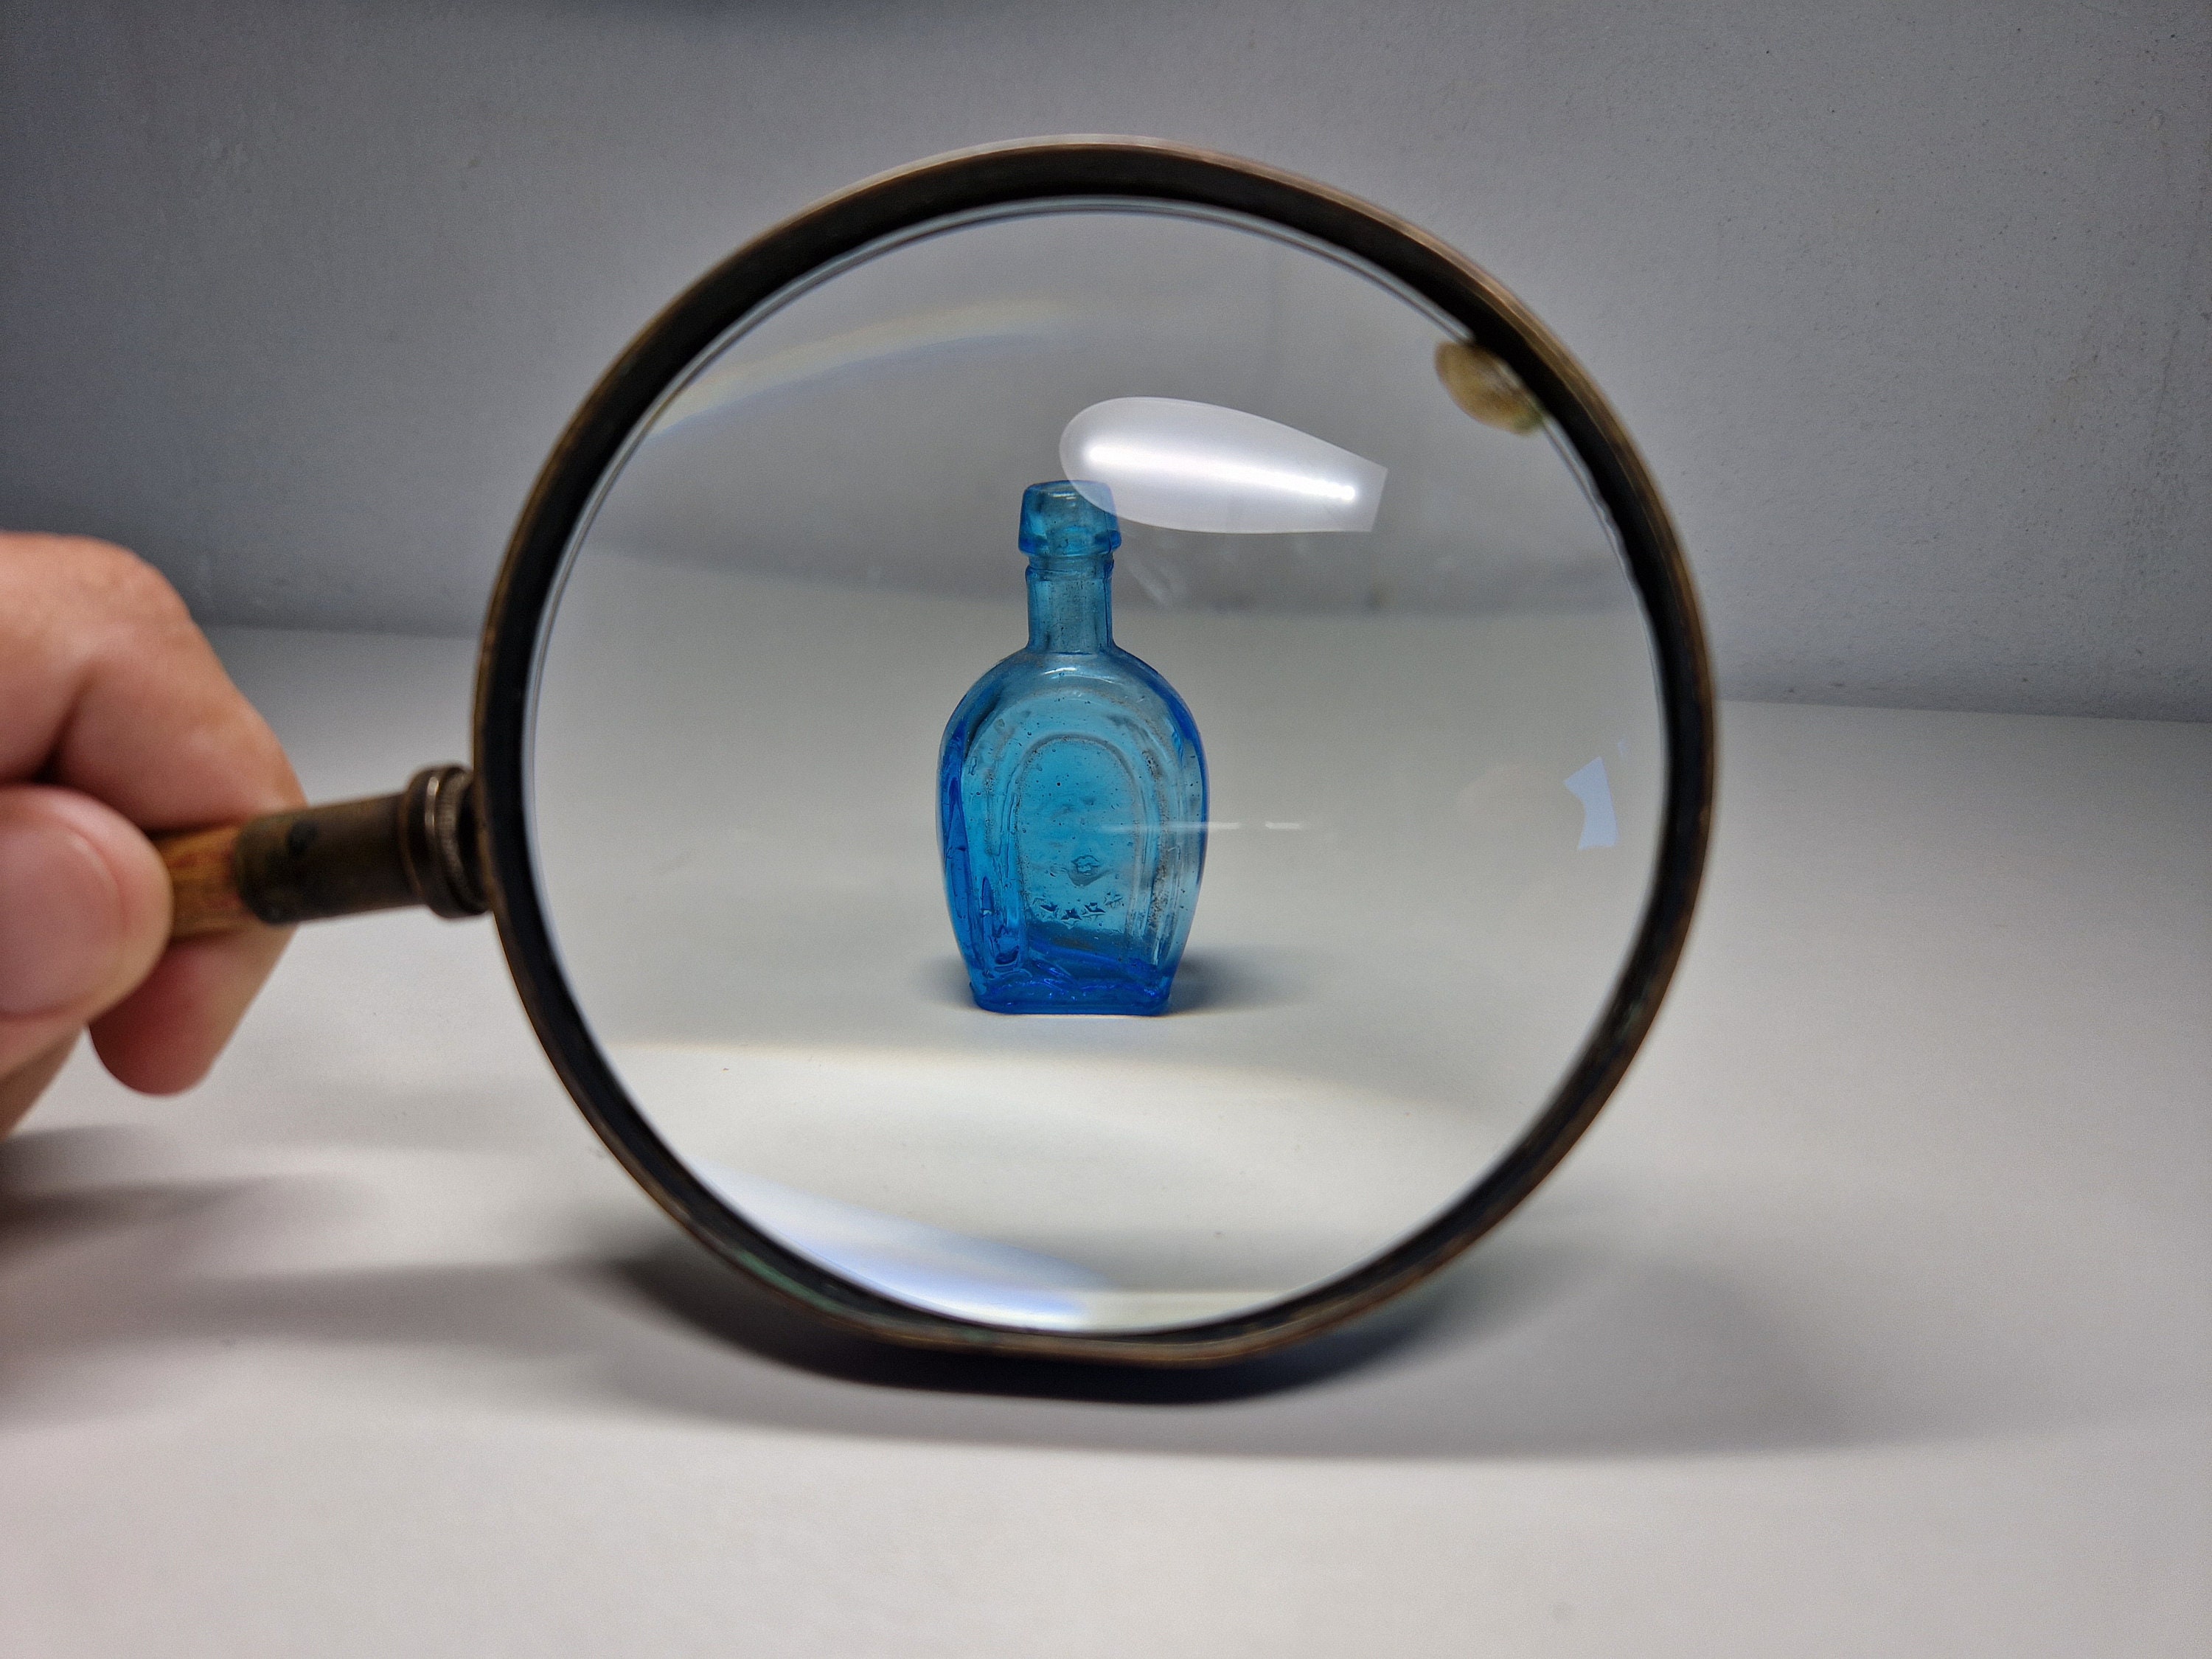 Vintage Retro J.S.O.I. Magnifying Glass Collectible Reading Glass